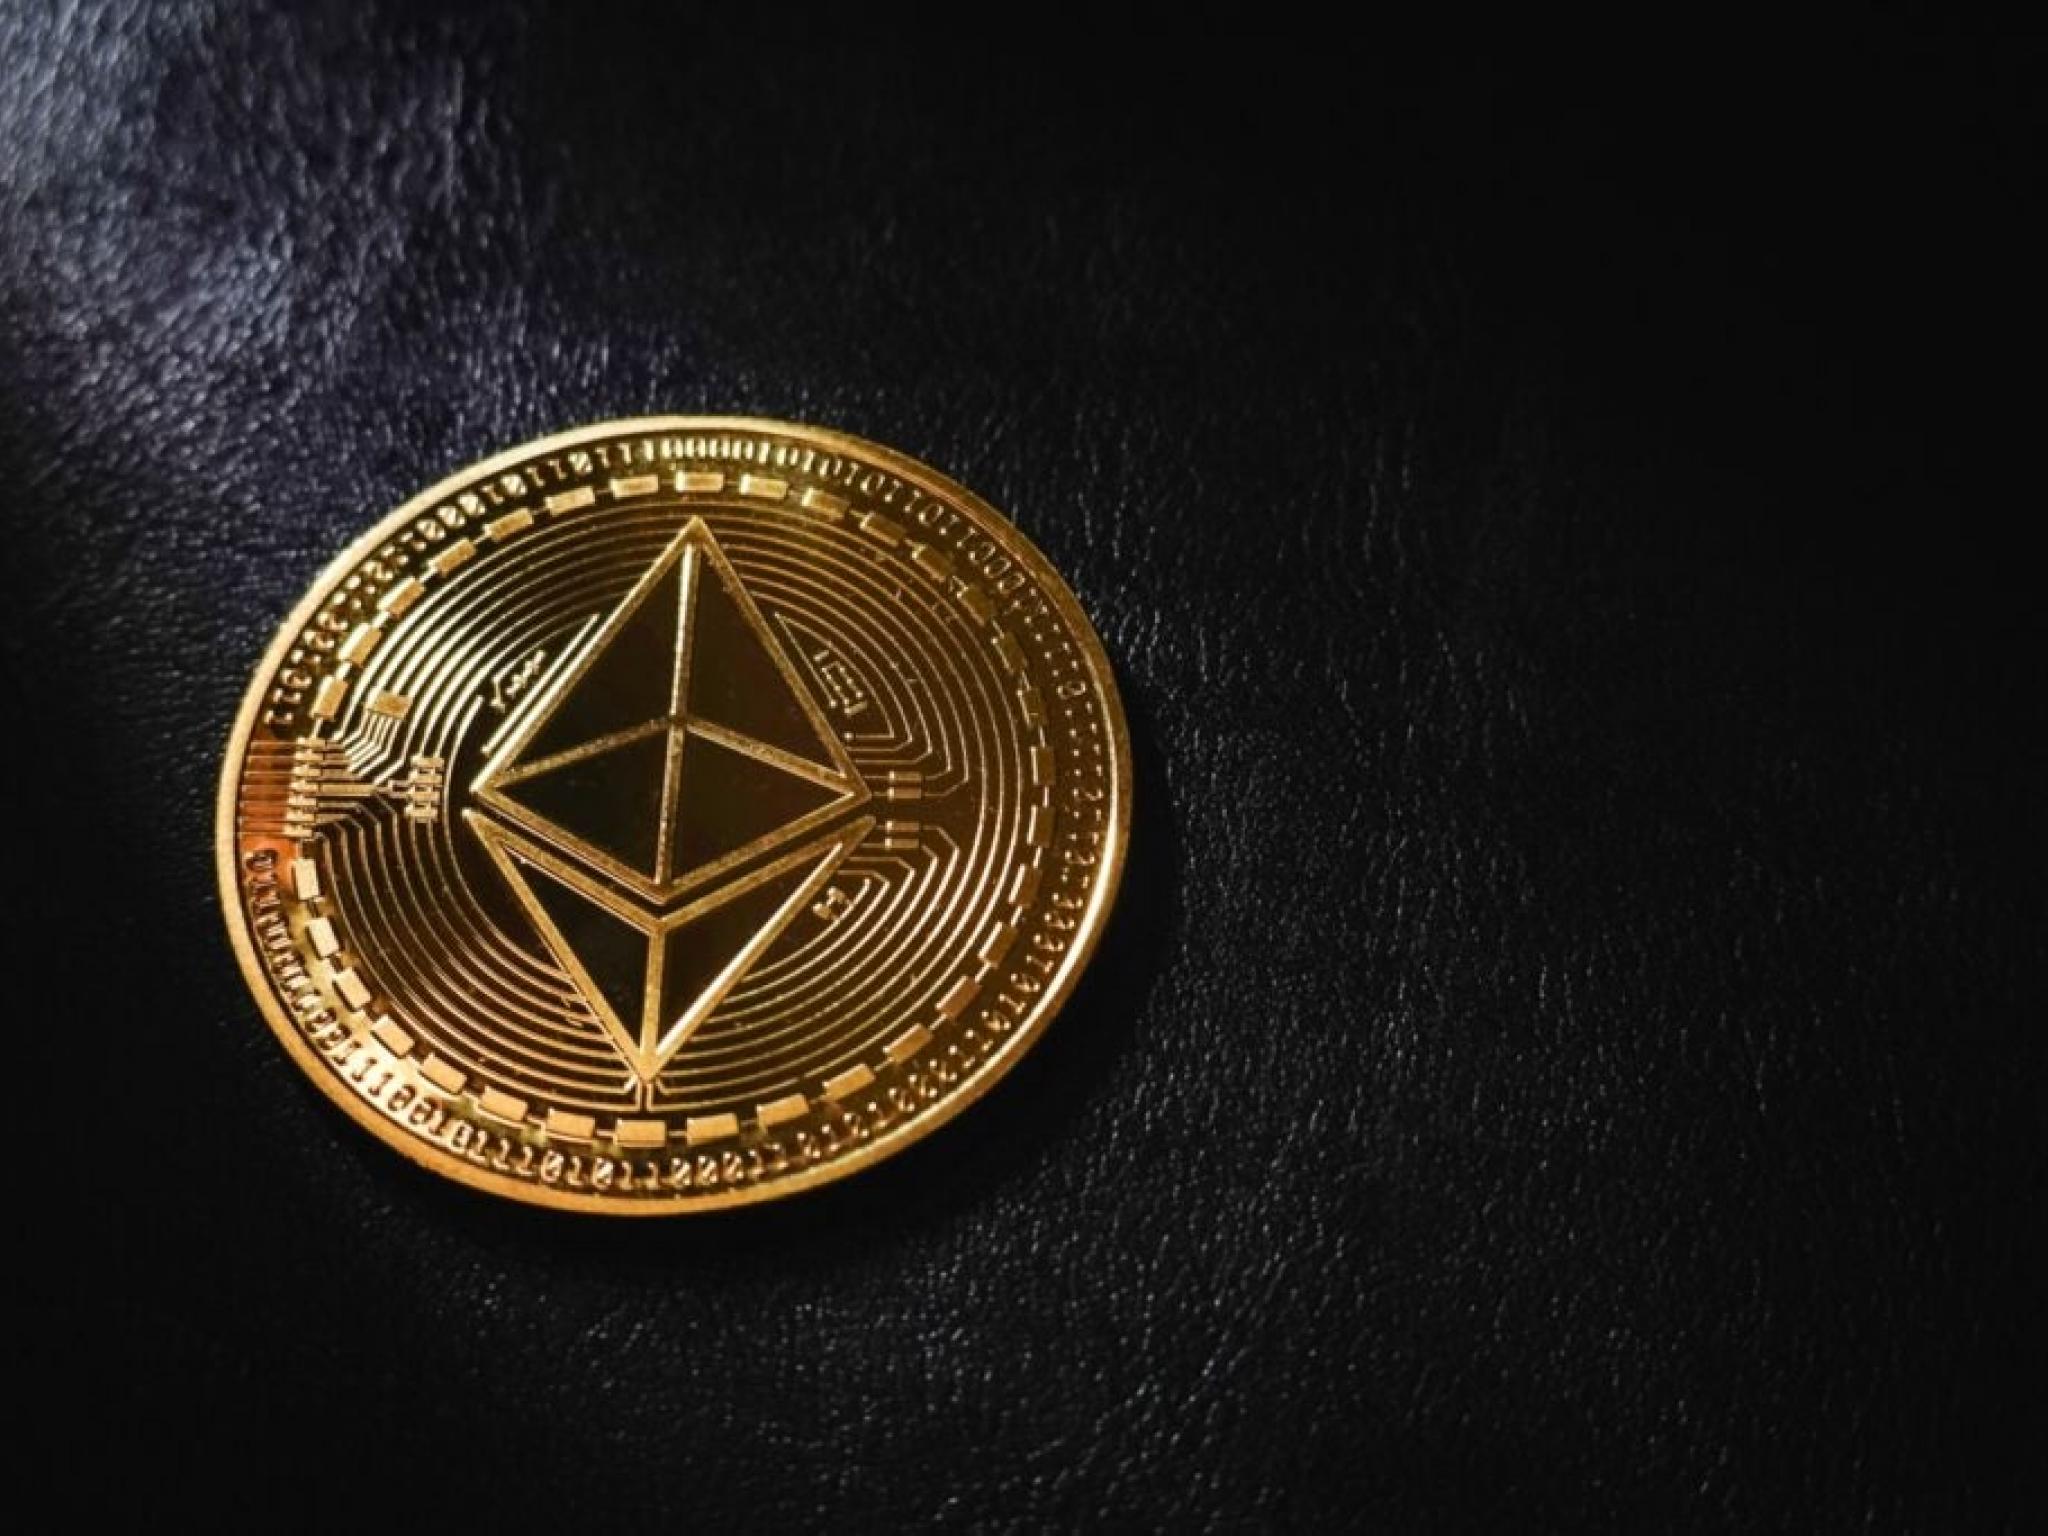  ethereum-and-altcoins-may-quickly-rebound-after-fomc-meeting-trader-predicts 